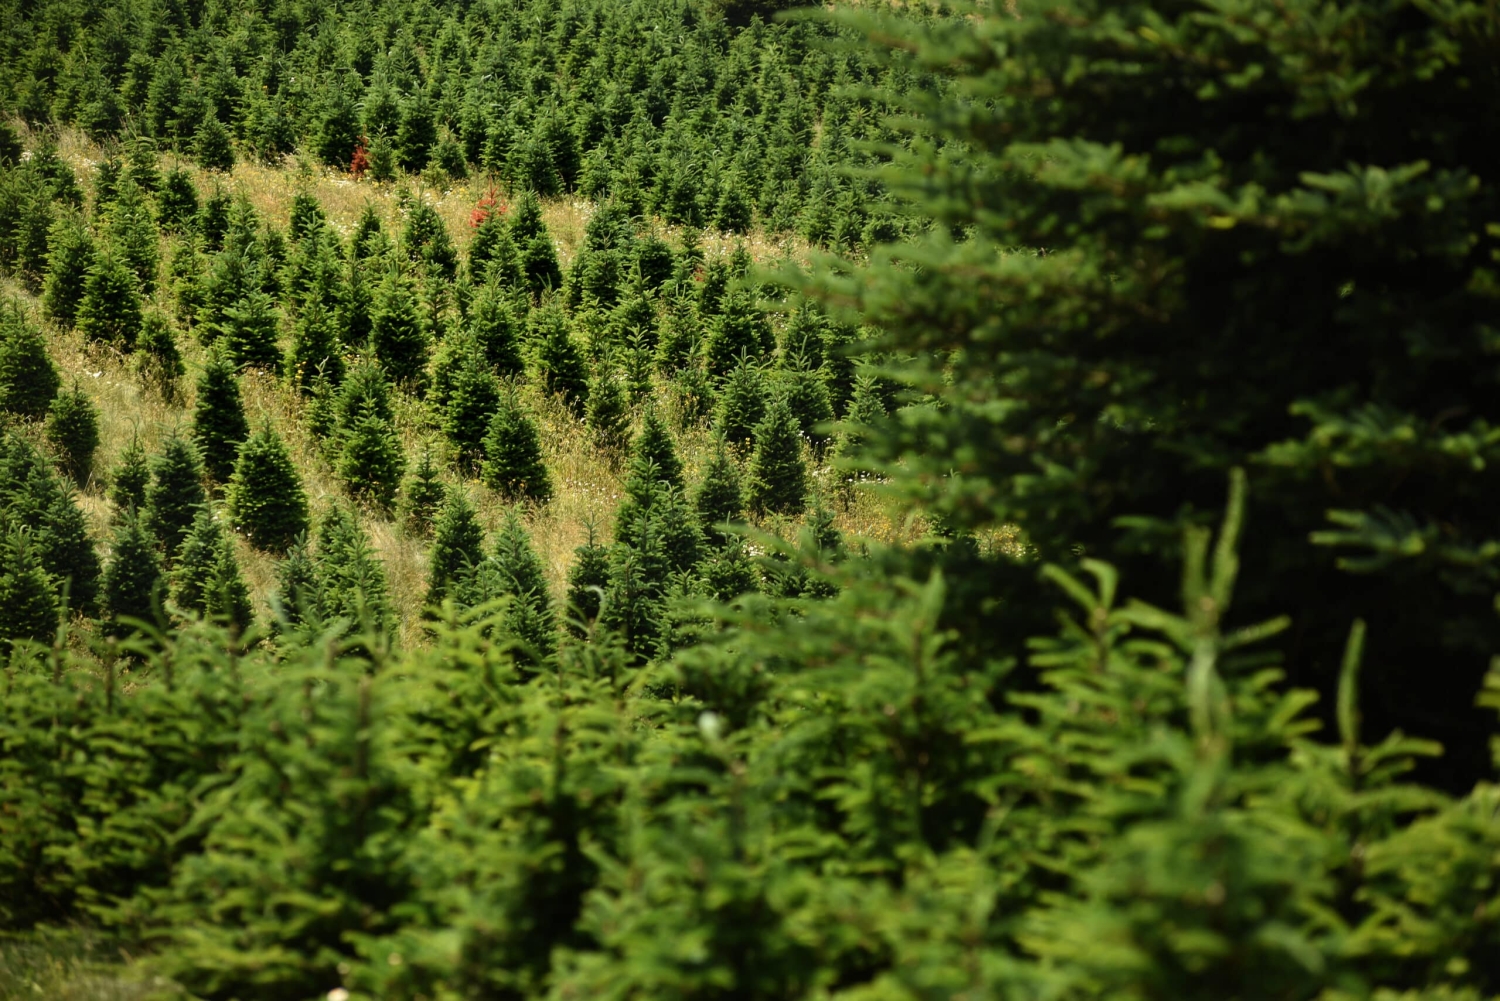 Fraser firs at Panoramic View Christmas Tree Farm in Watauga County, outside Boone - What Can You Expect at a North Carolina Christmas Tree Lot This Year? - College of Natural Resources at NC State University